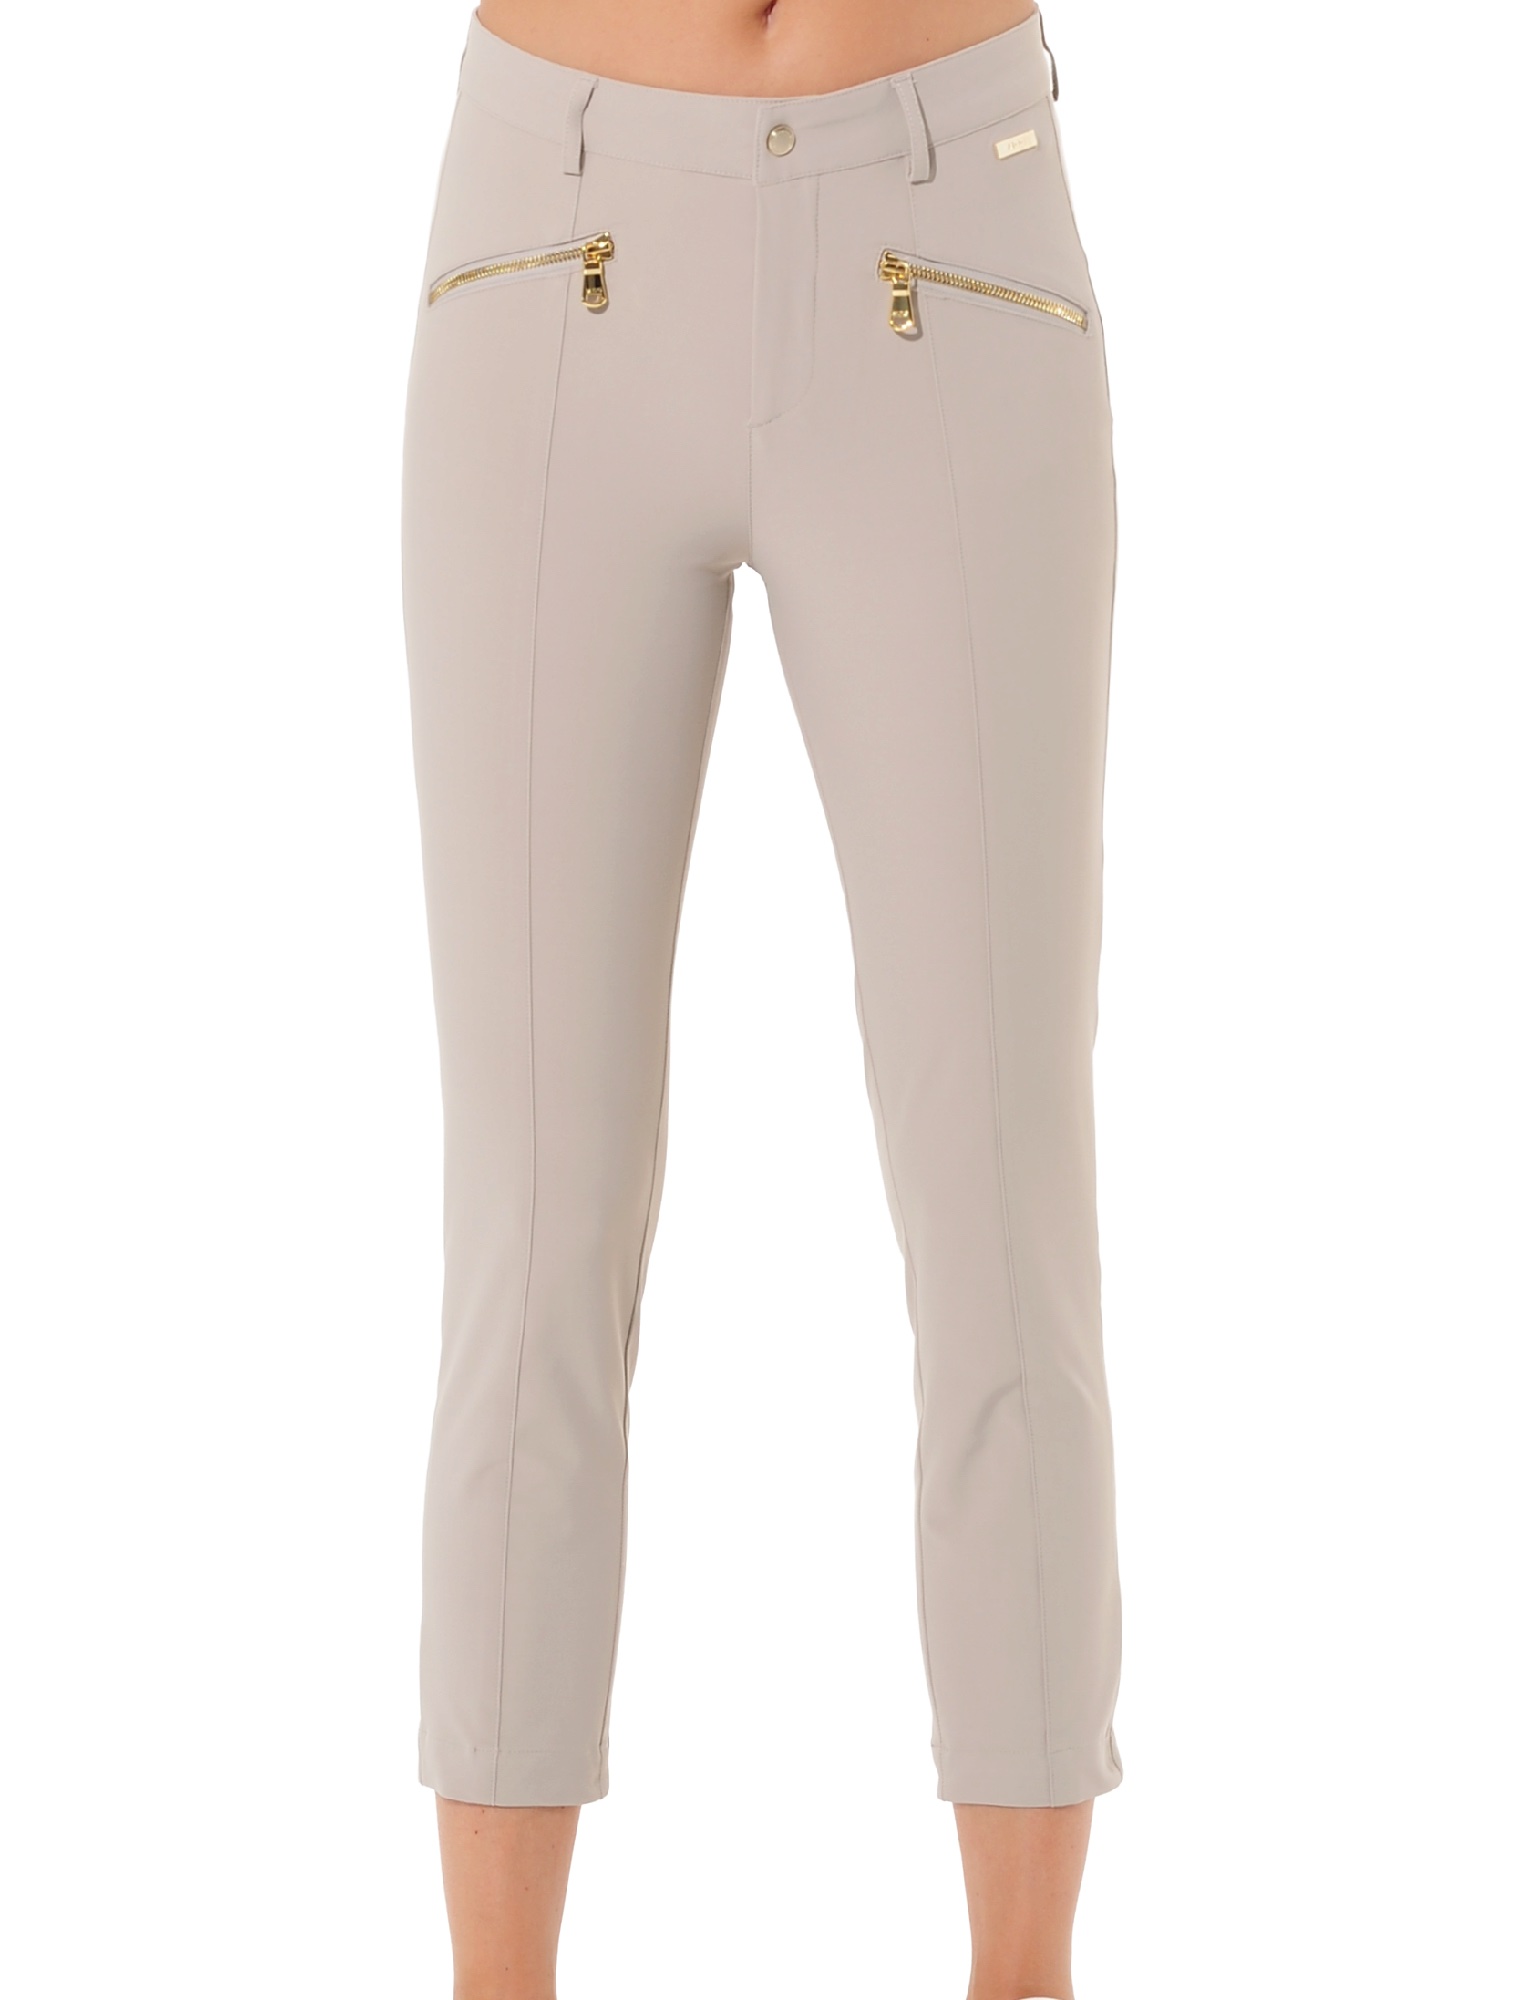 4way stretch shiny gold zip curvy cropped pants light taupe 